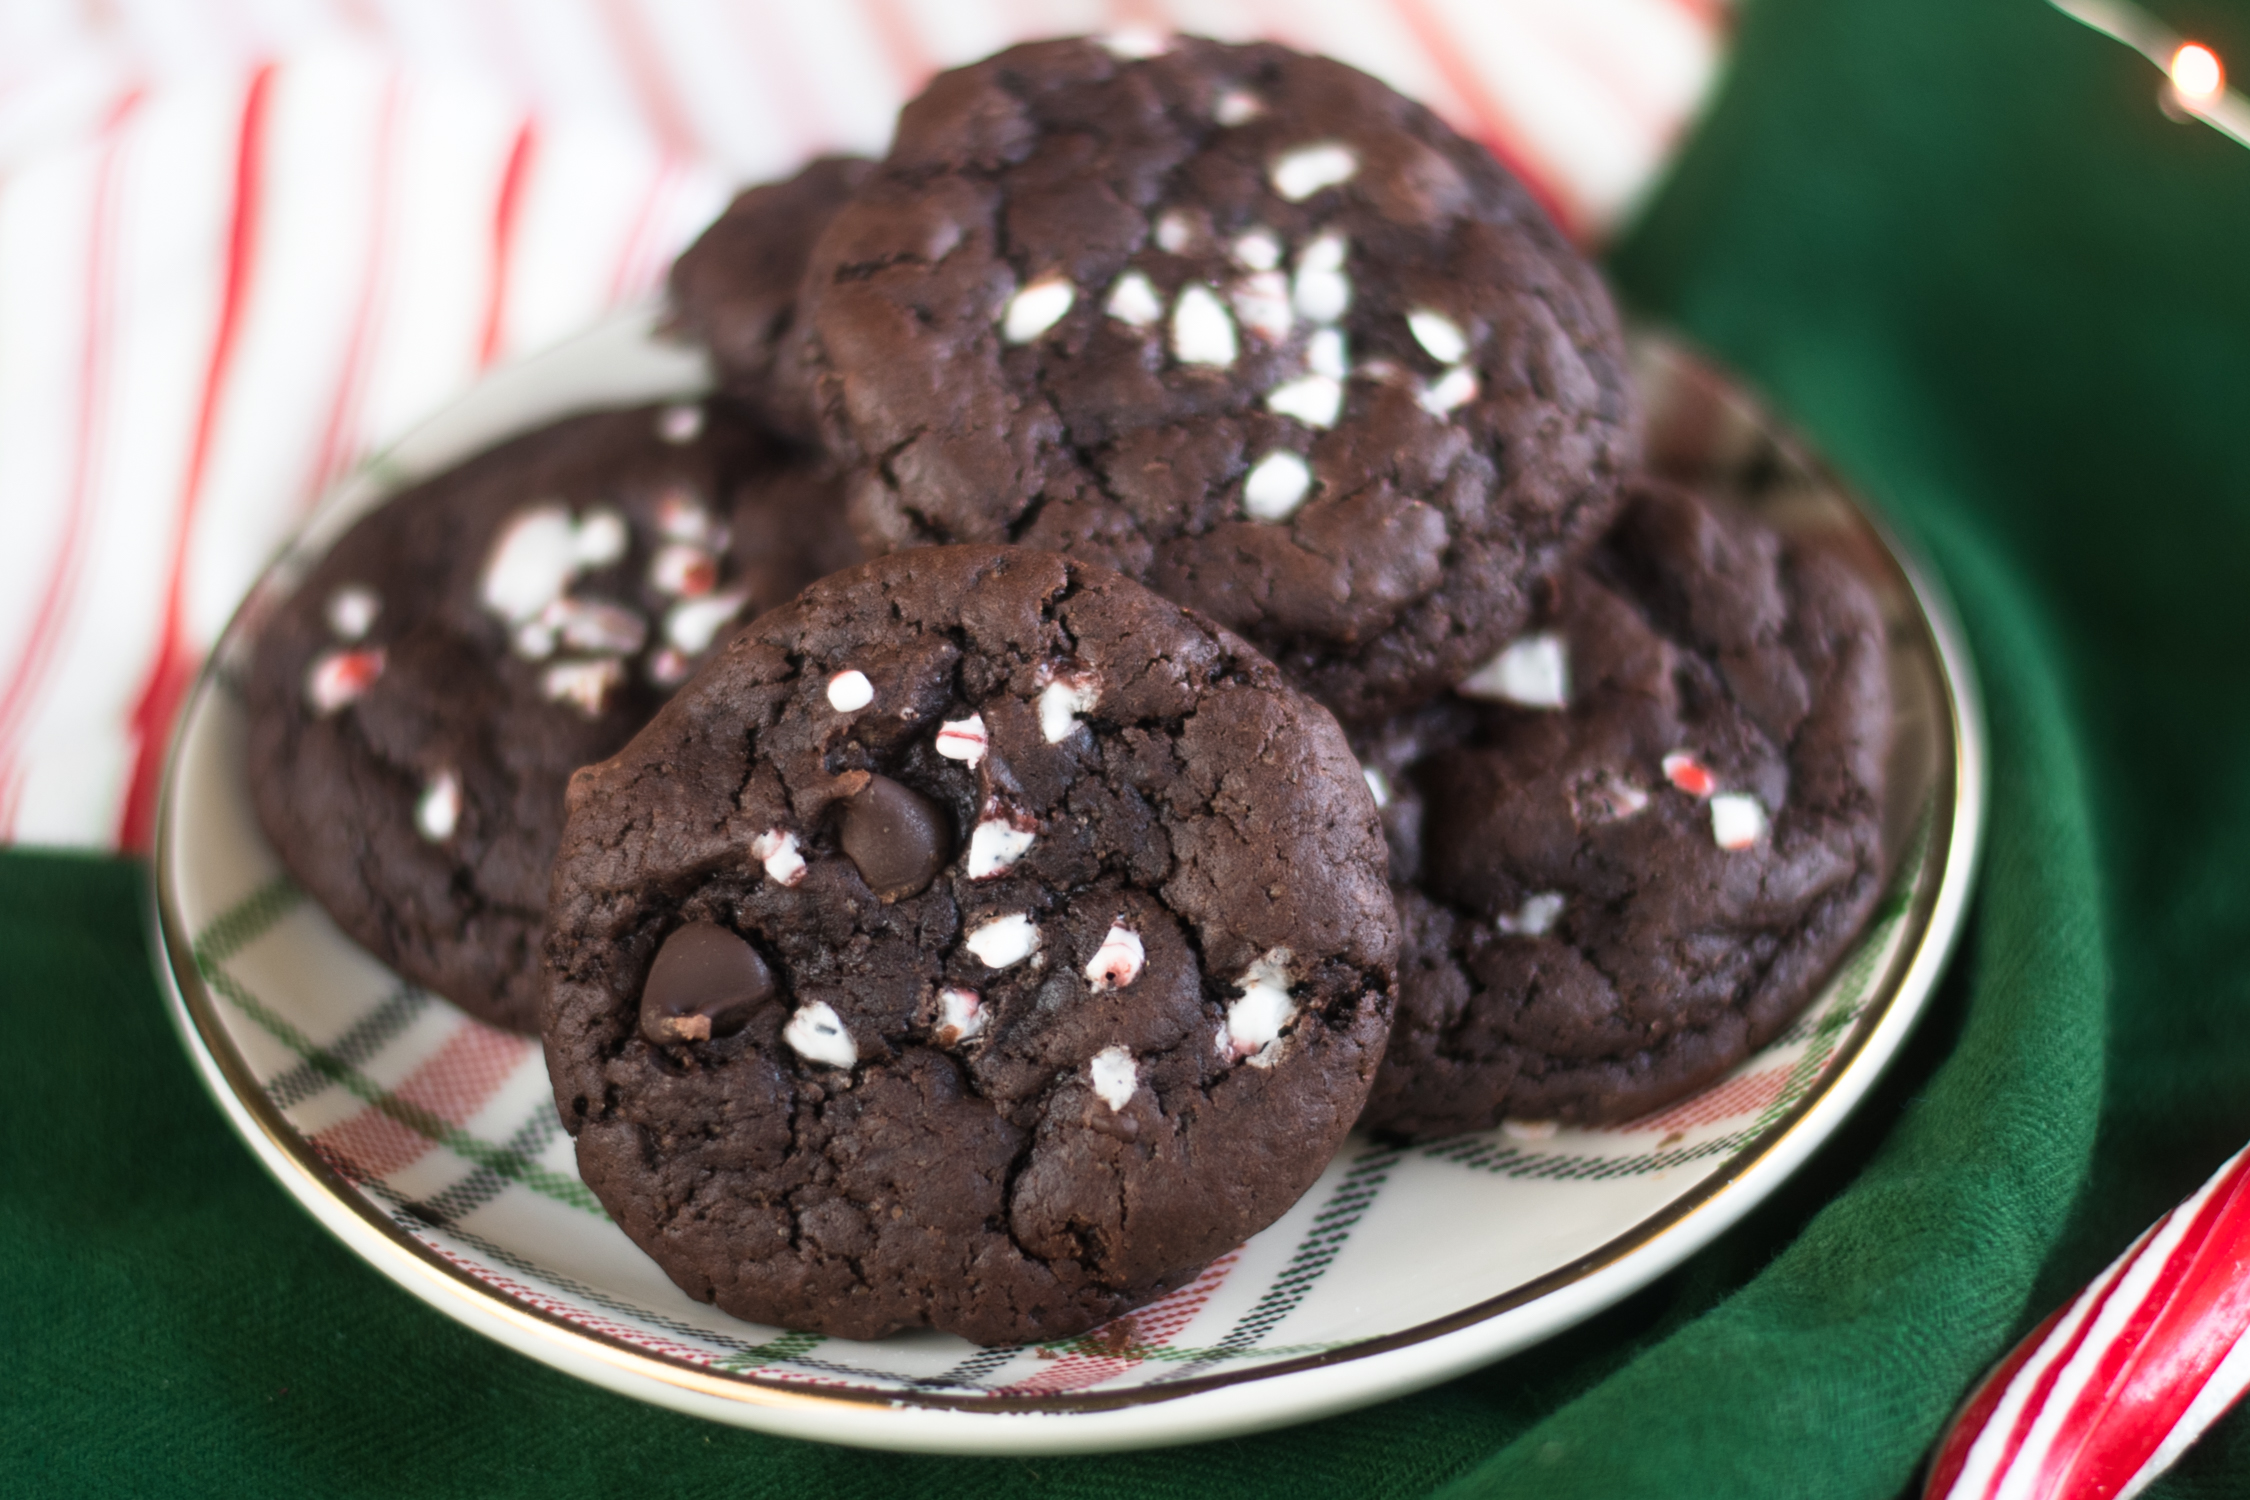 Vegan Chocolate Peppermint Cookies topped with crushed candy canes are perfect for the holidays! #vegan #baking #Christmas #dessert #cookies